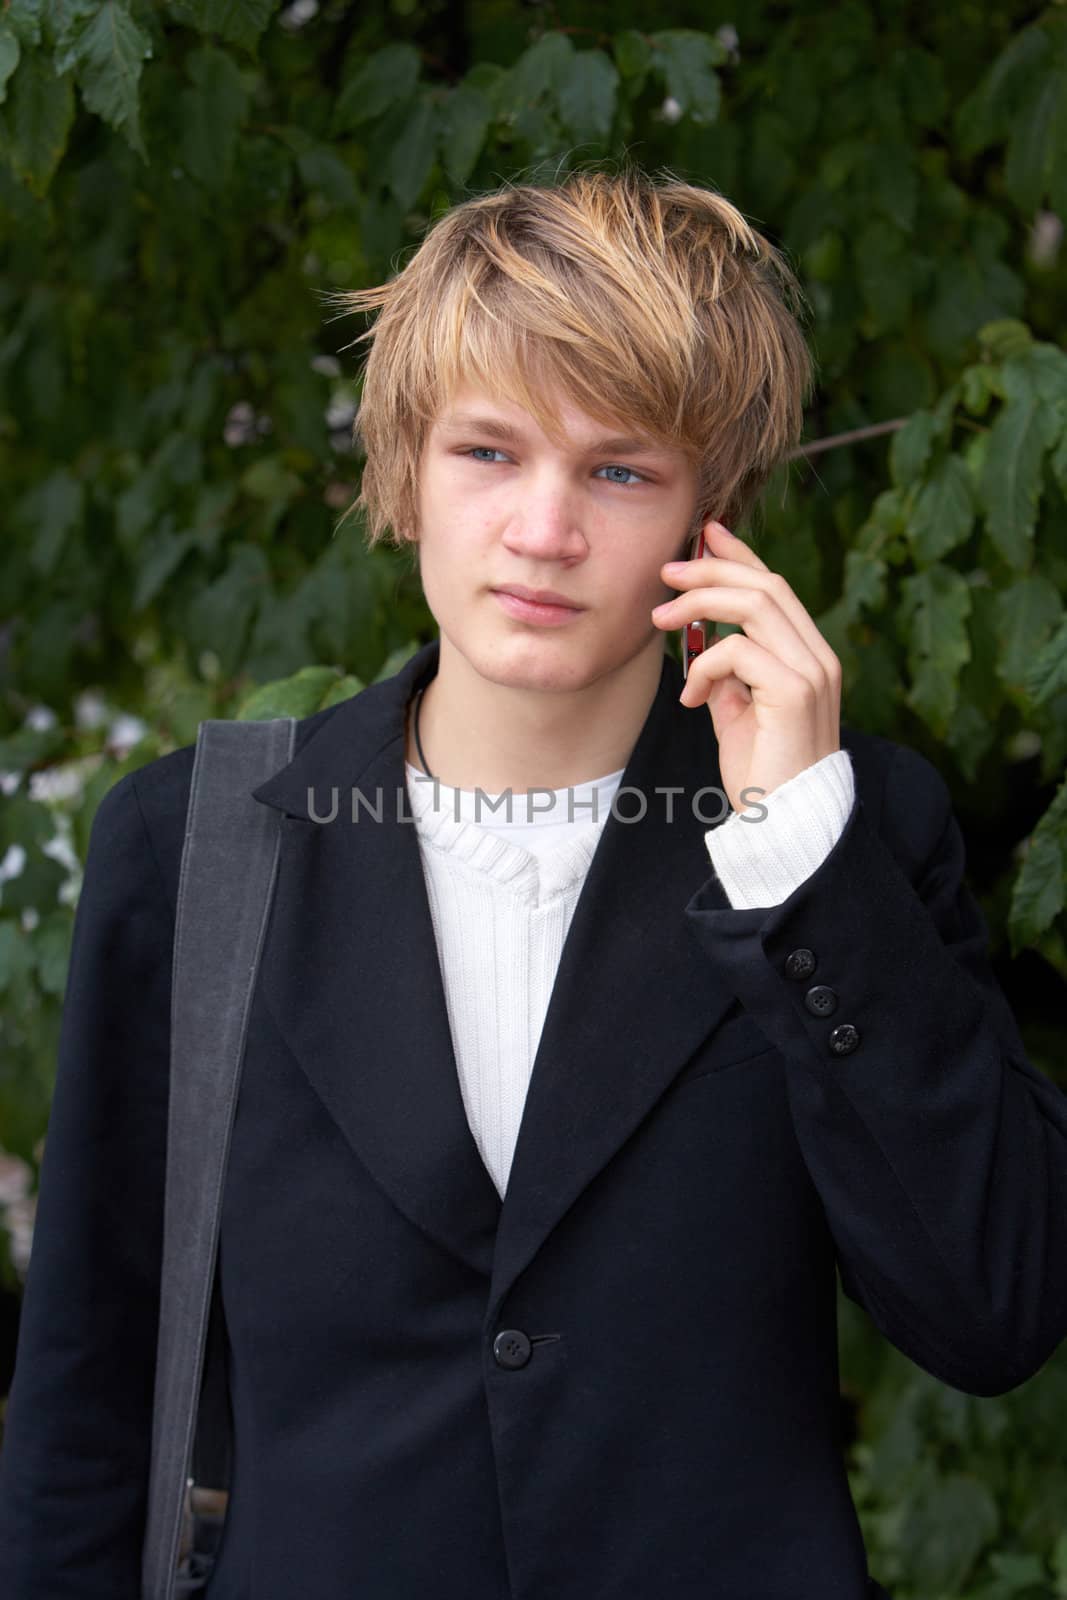 Teenage boy using mobile phone in city park, frontal view